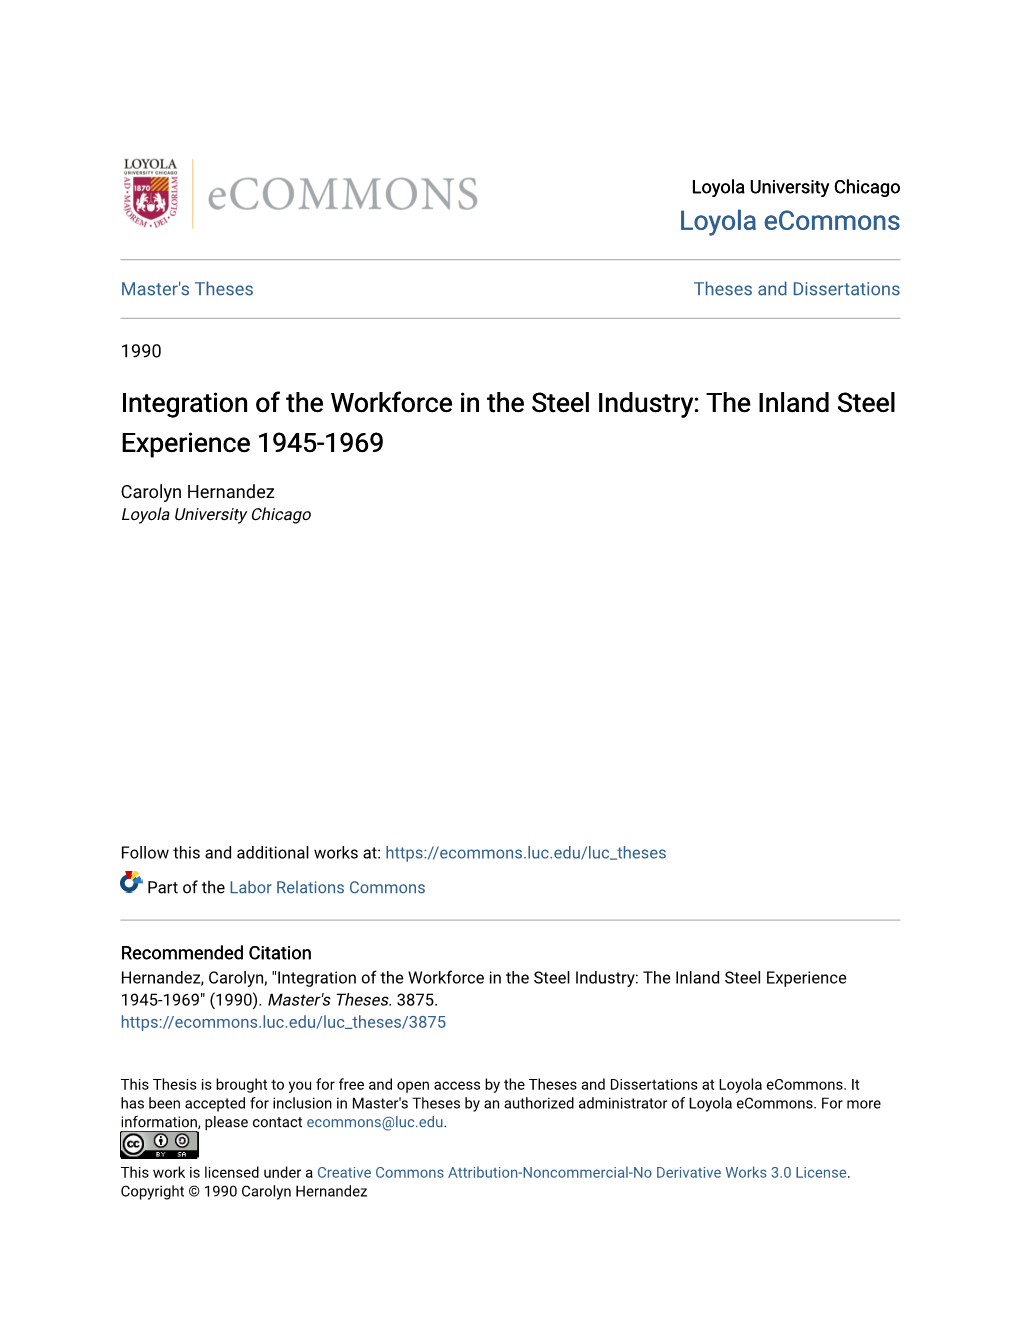 Integration of the Workforce in the Steel Industry: the Inland Steel Experience 1945-1969